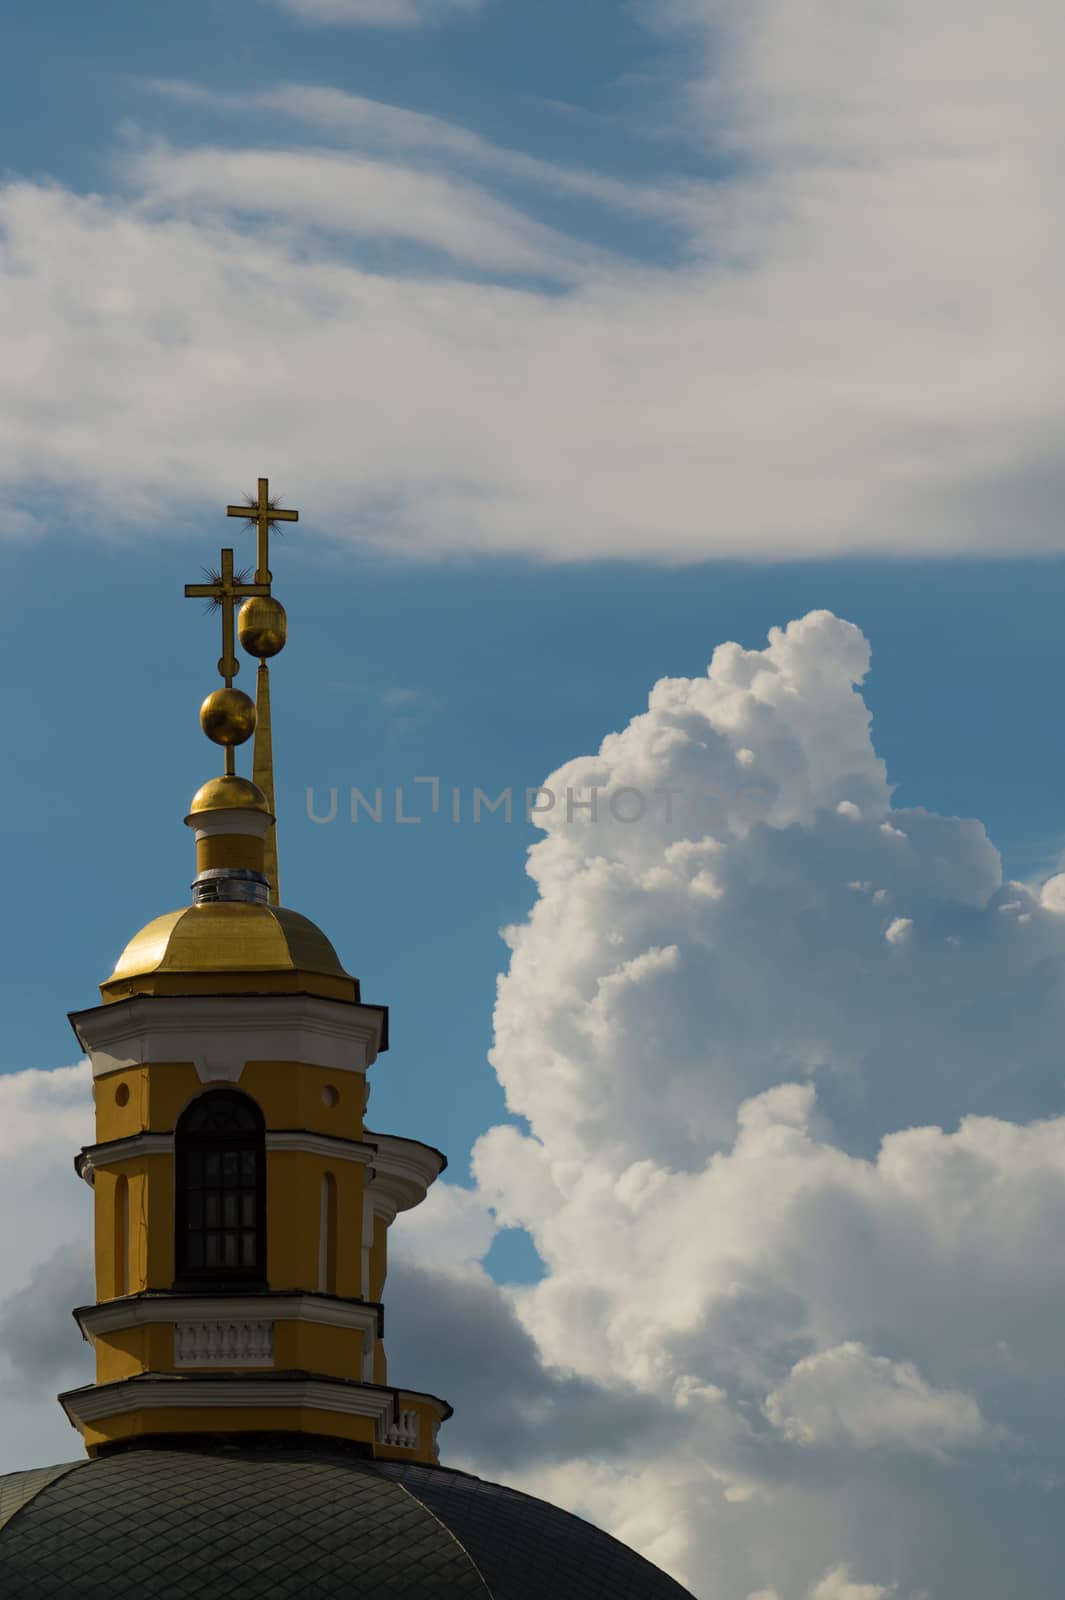 a yellow dome of a christian church against a blue sky with invasive clouds.